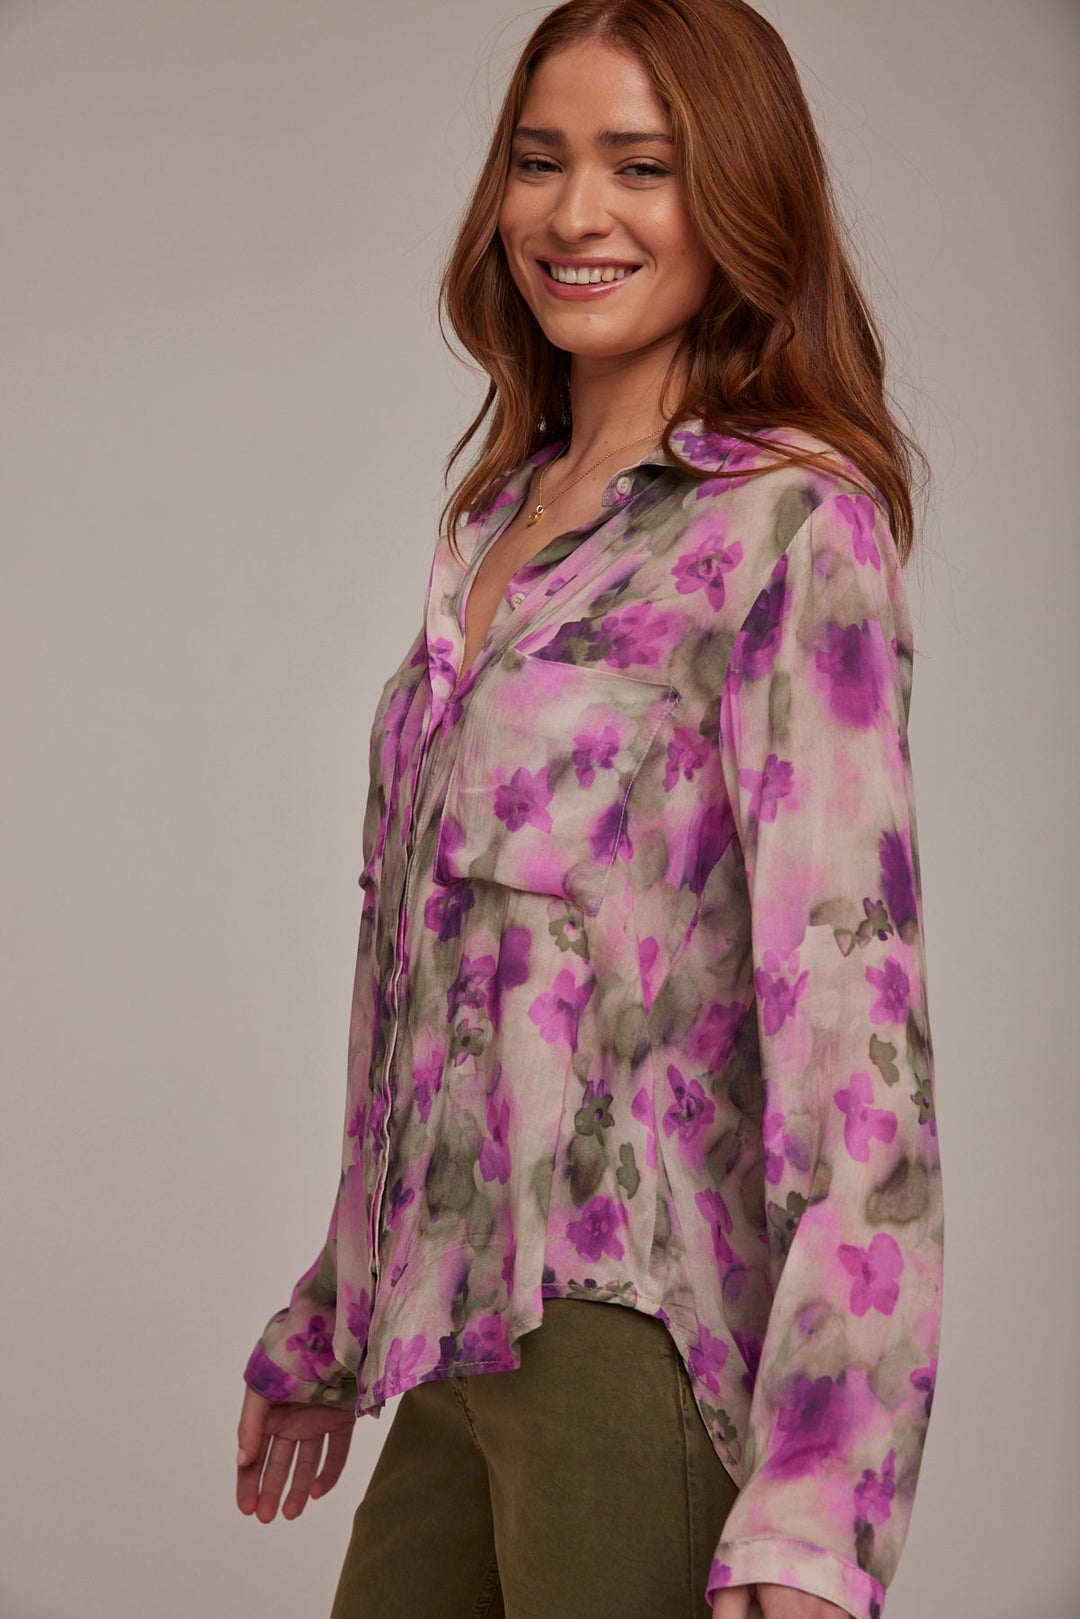 Full Button Down Hipster Blouse - Floral Camo Print